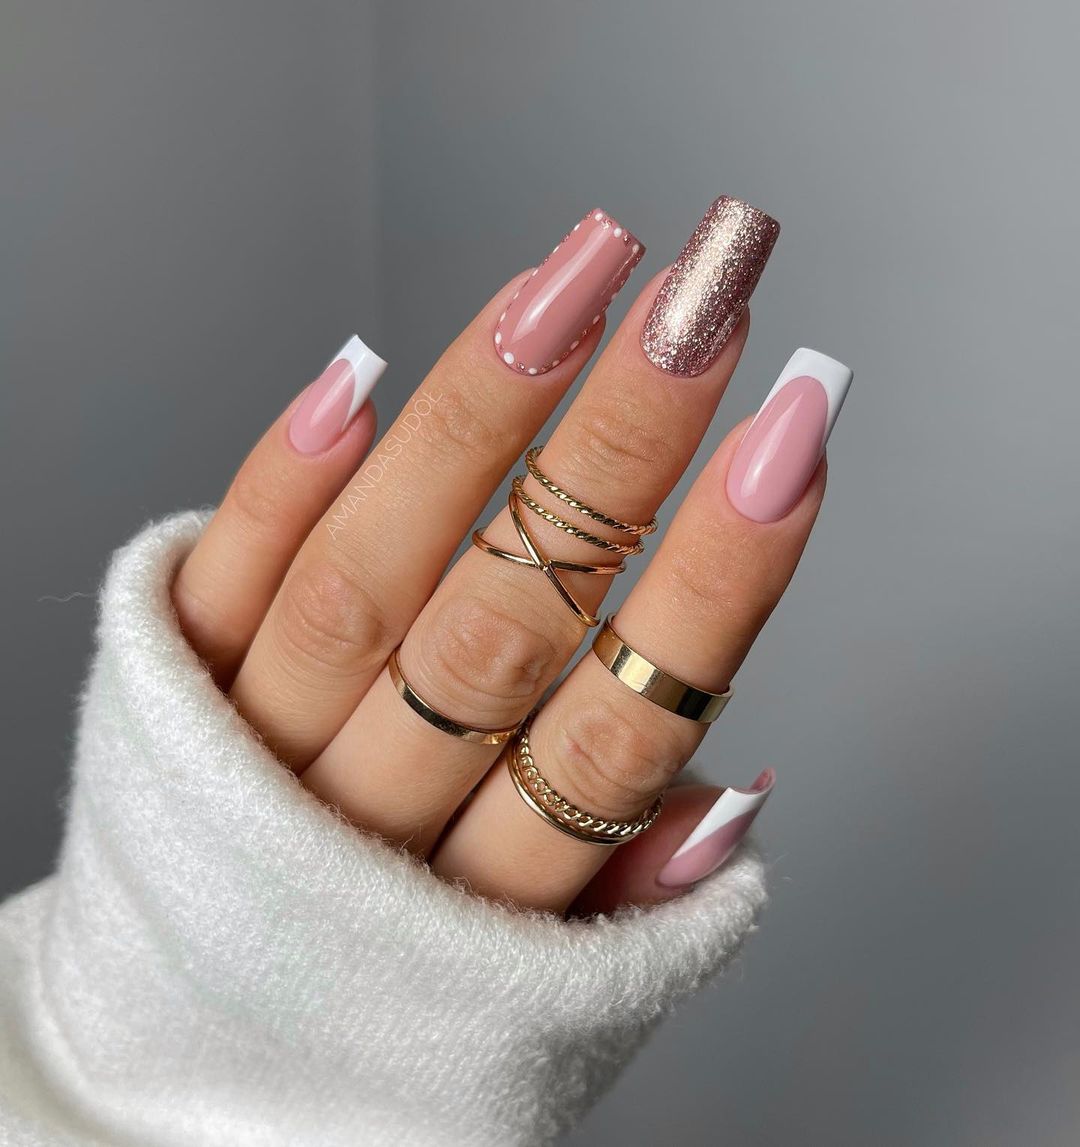 Long Square Pink Nails with Rose Gold Glitter On Accent Nail